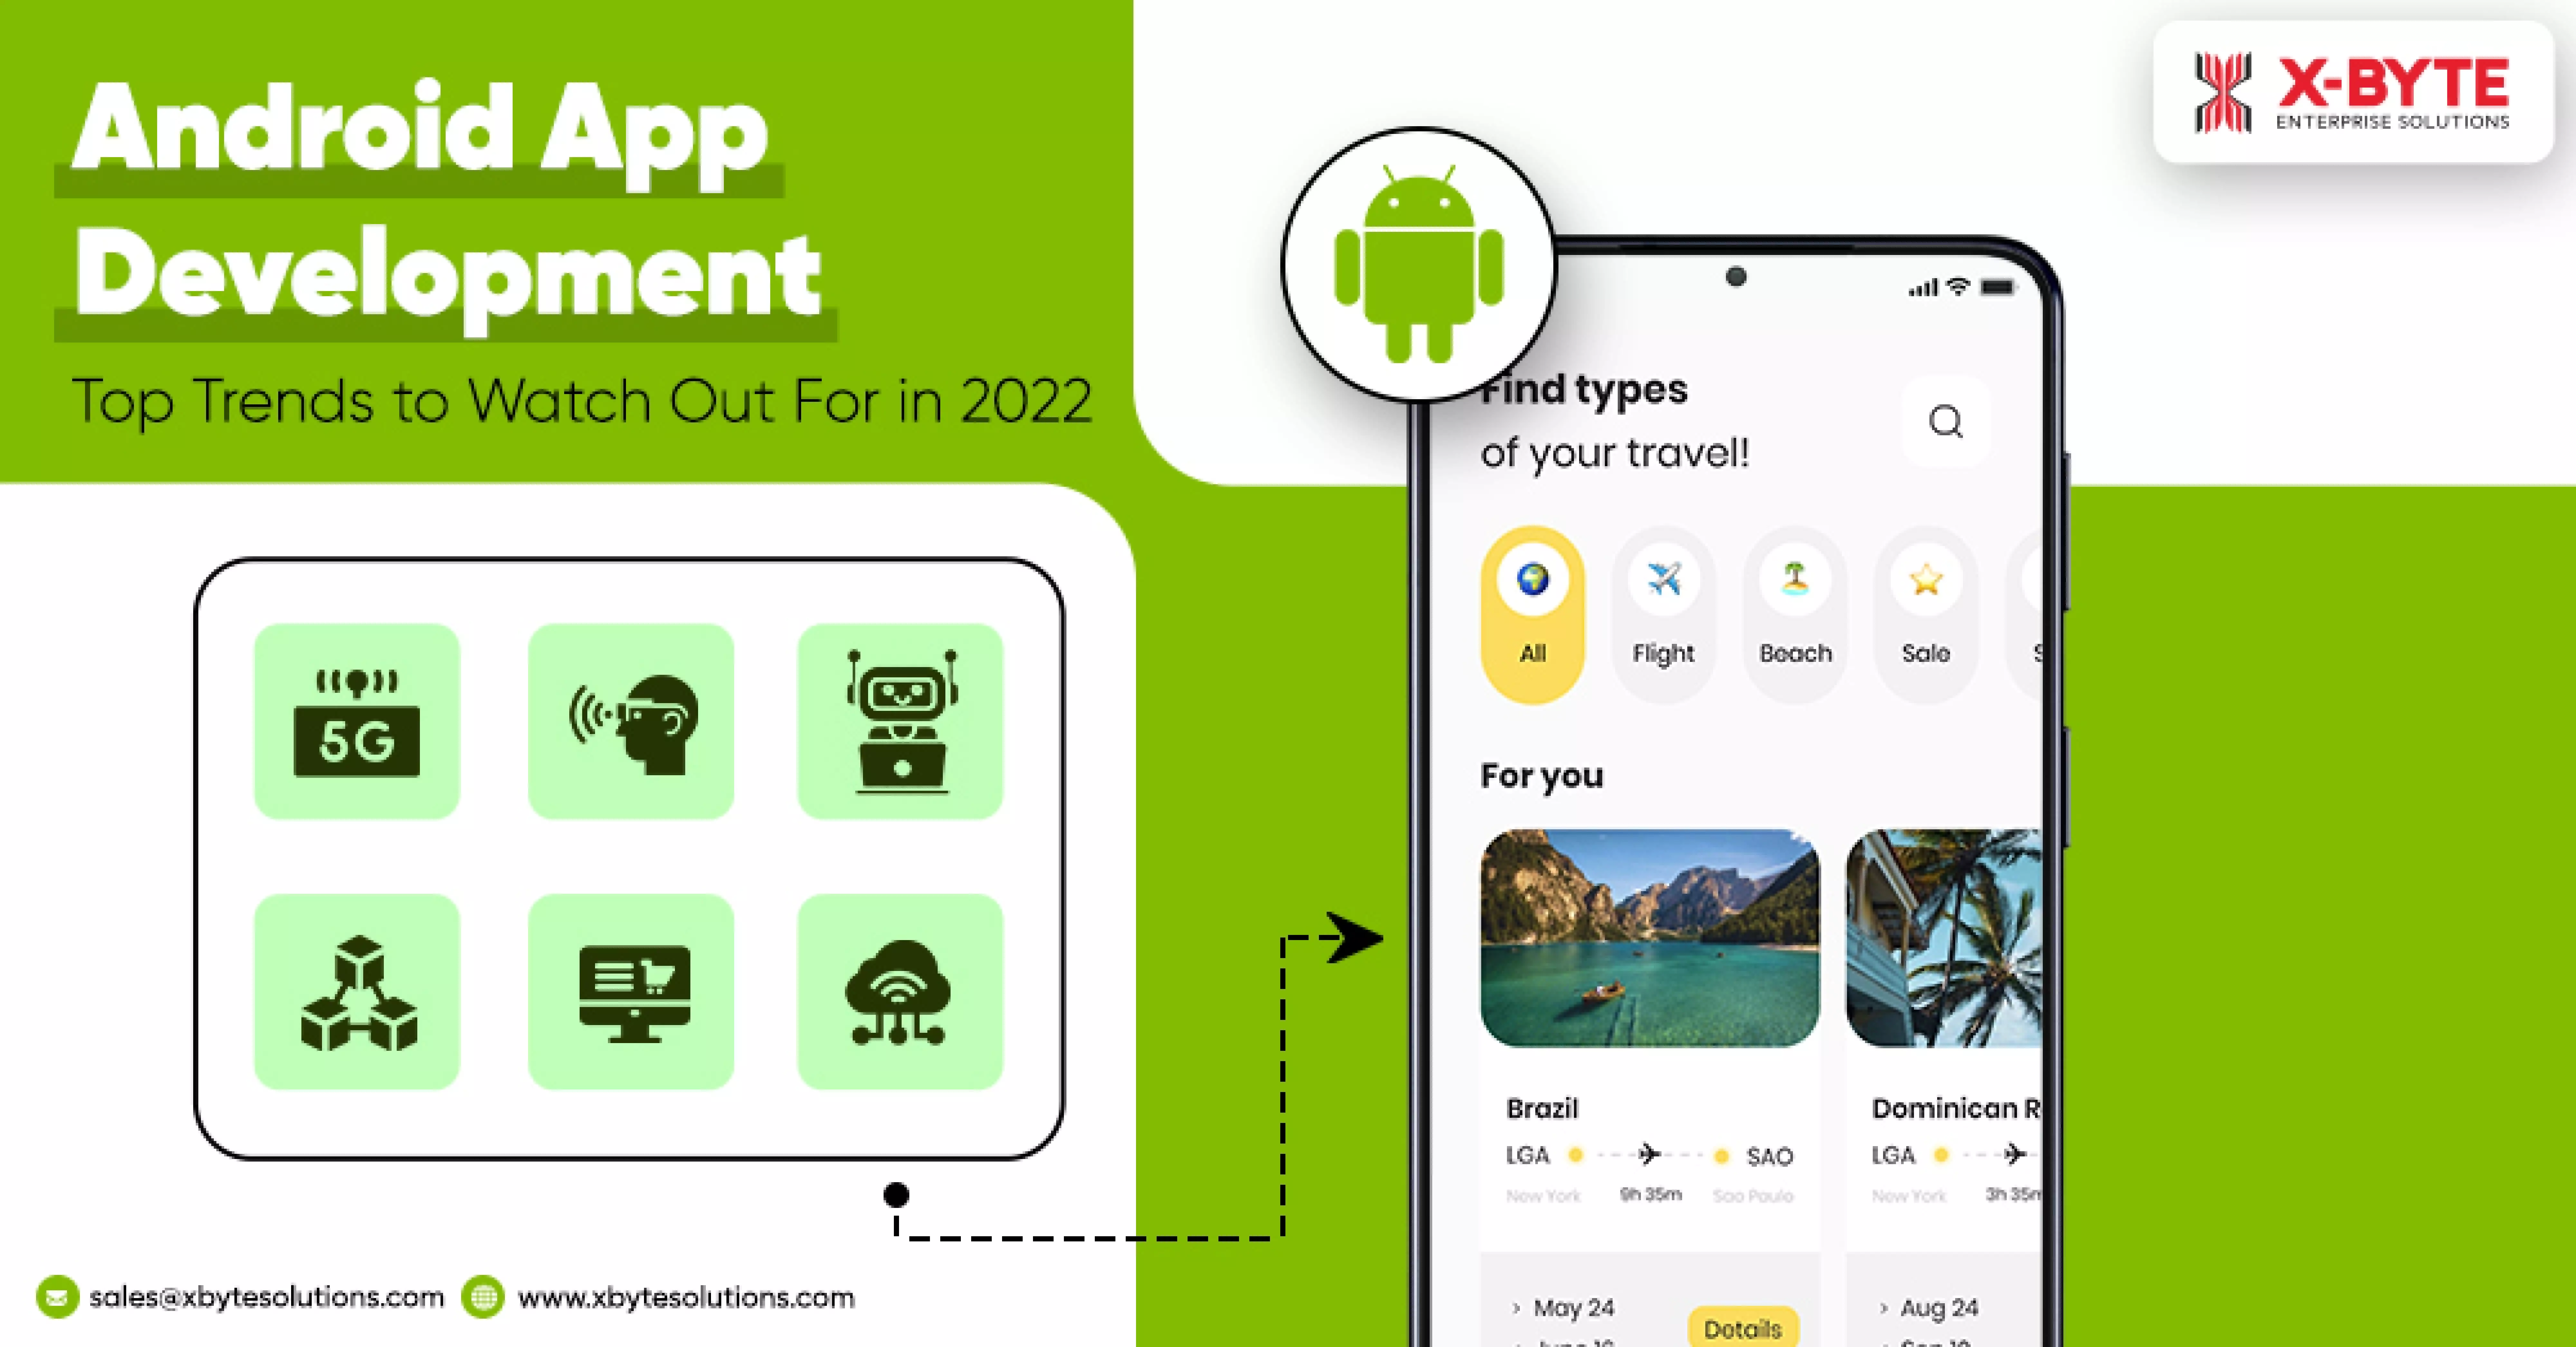 Android App Development – Top Trends to watch out for in 2022